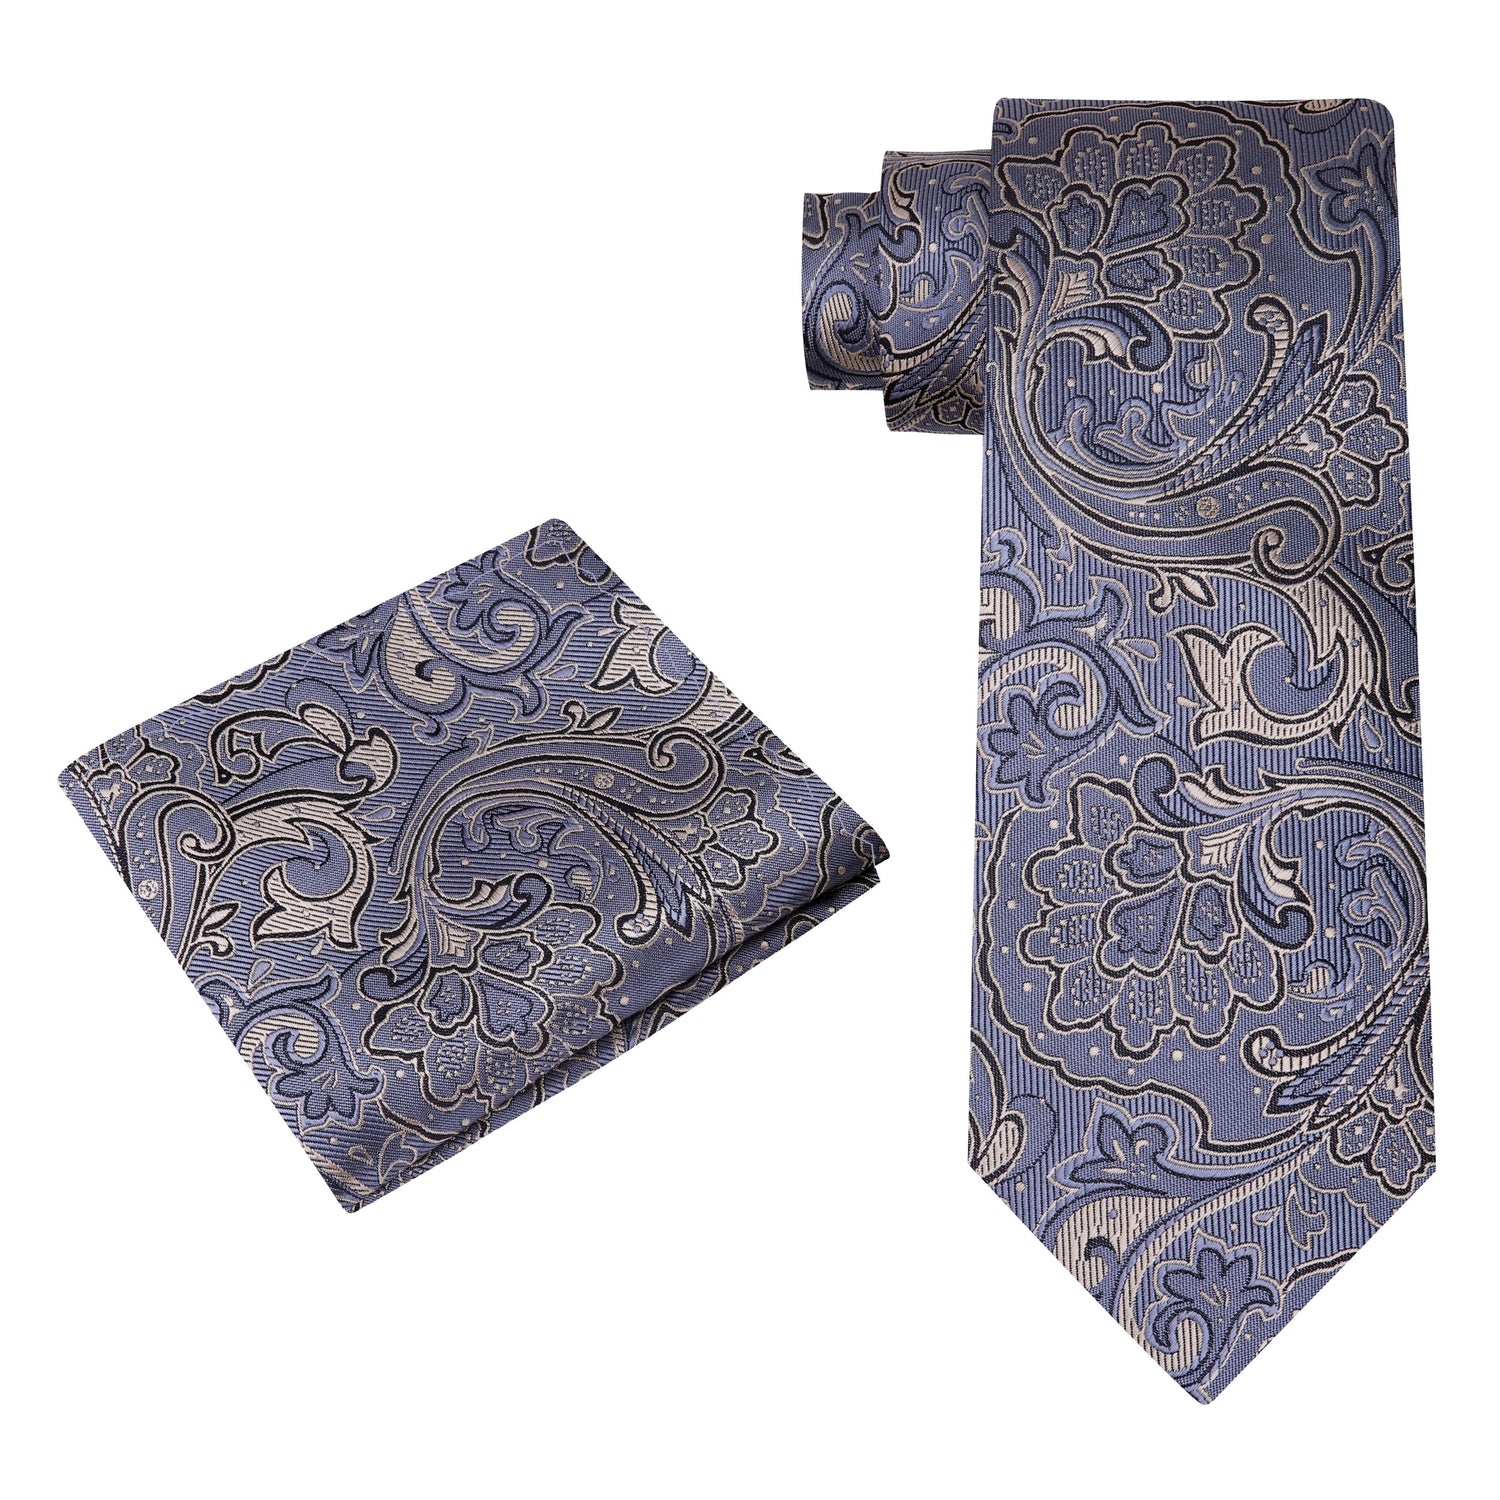 Alt View: A Dark Grey, Grey Abstract Paisley Pattern Silk Necktie and Matching Pocket Square